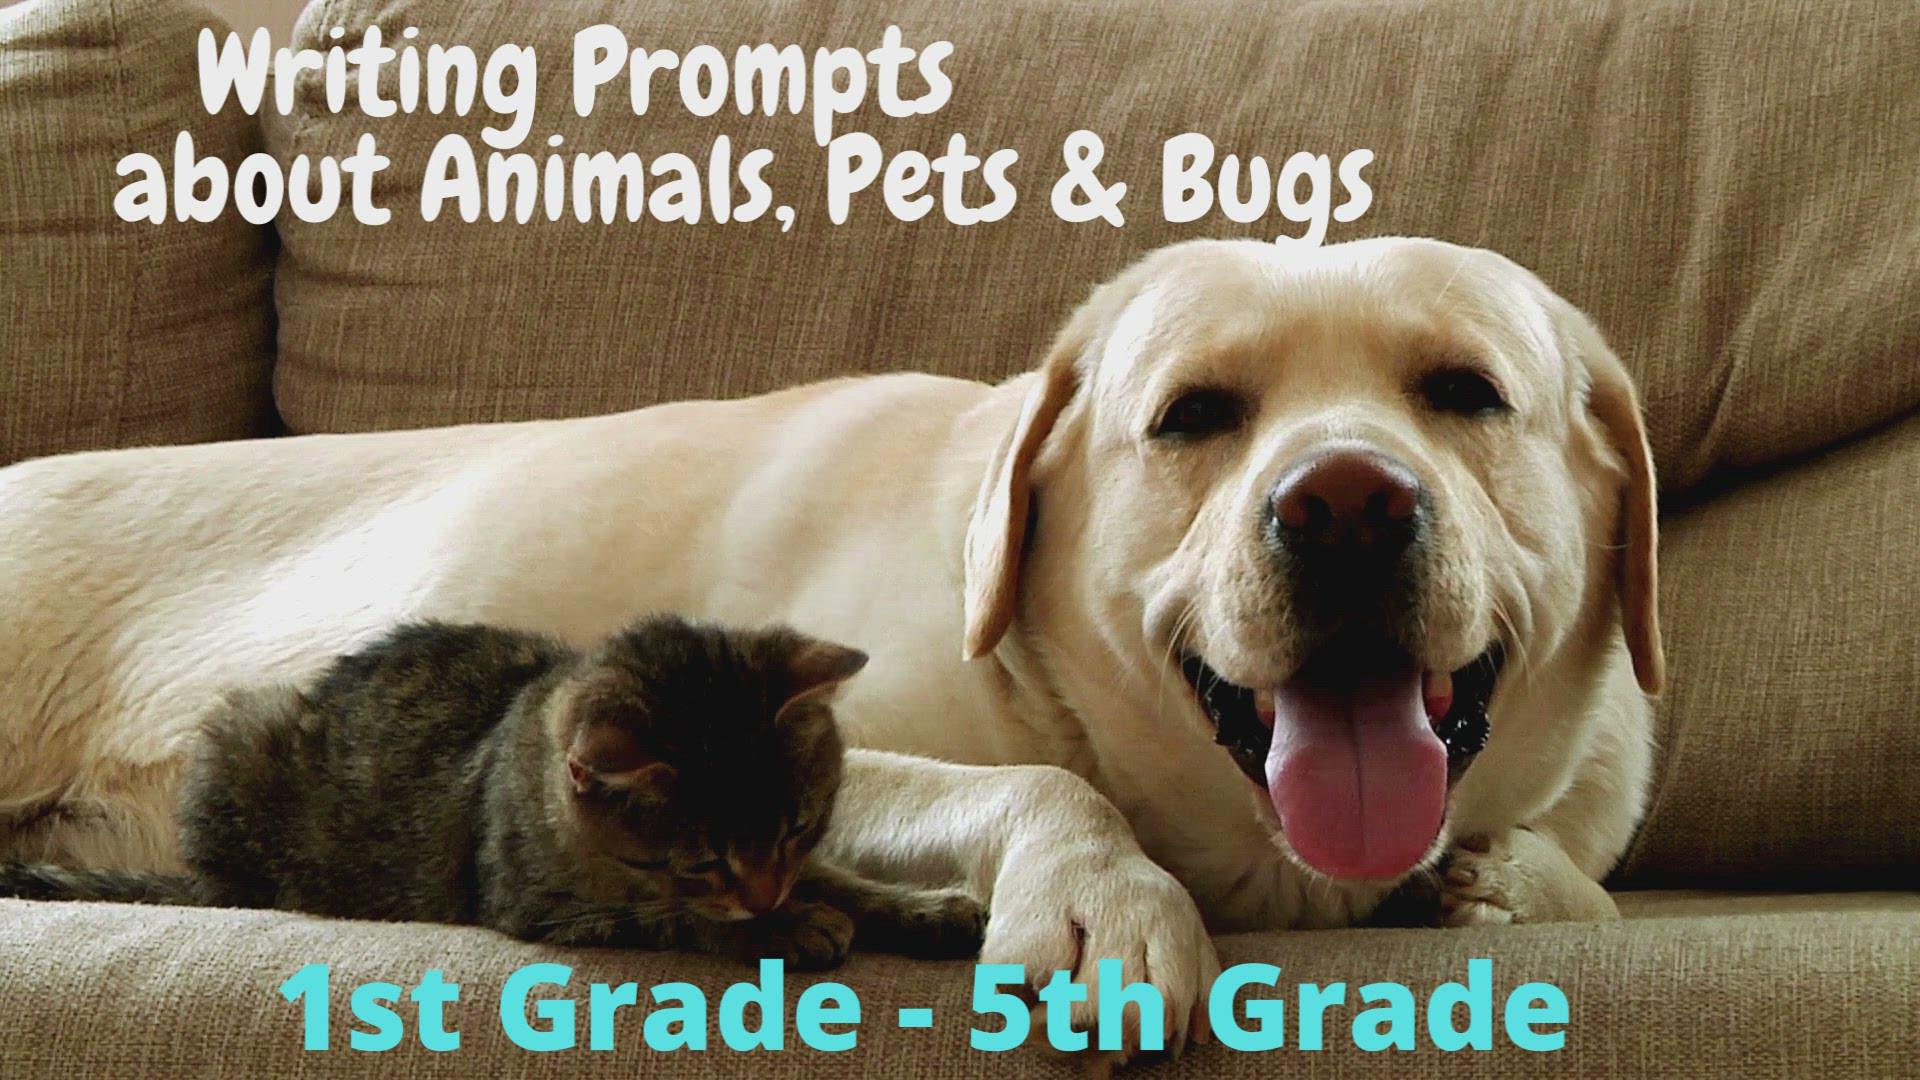 'Video thumbnail for Writing Prompts on Pets, Animals & Bugs'